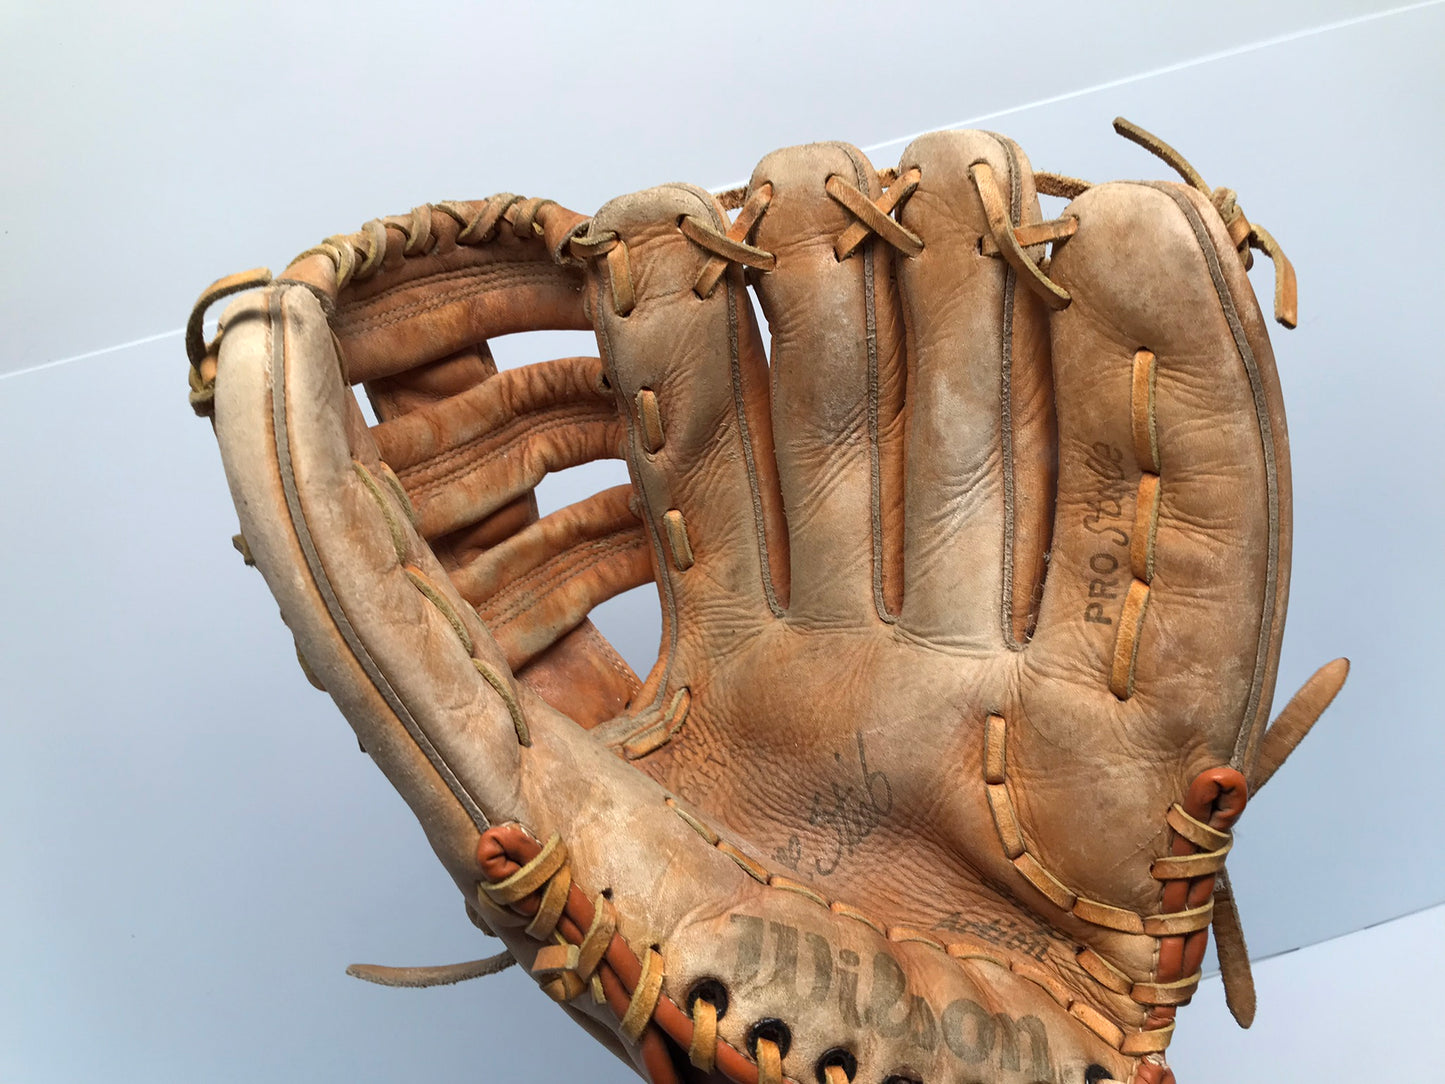 Baseball Glove 12 inch Wilson Leather Tan Fits On Left Hand Vintage